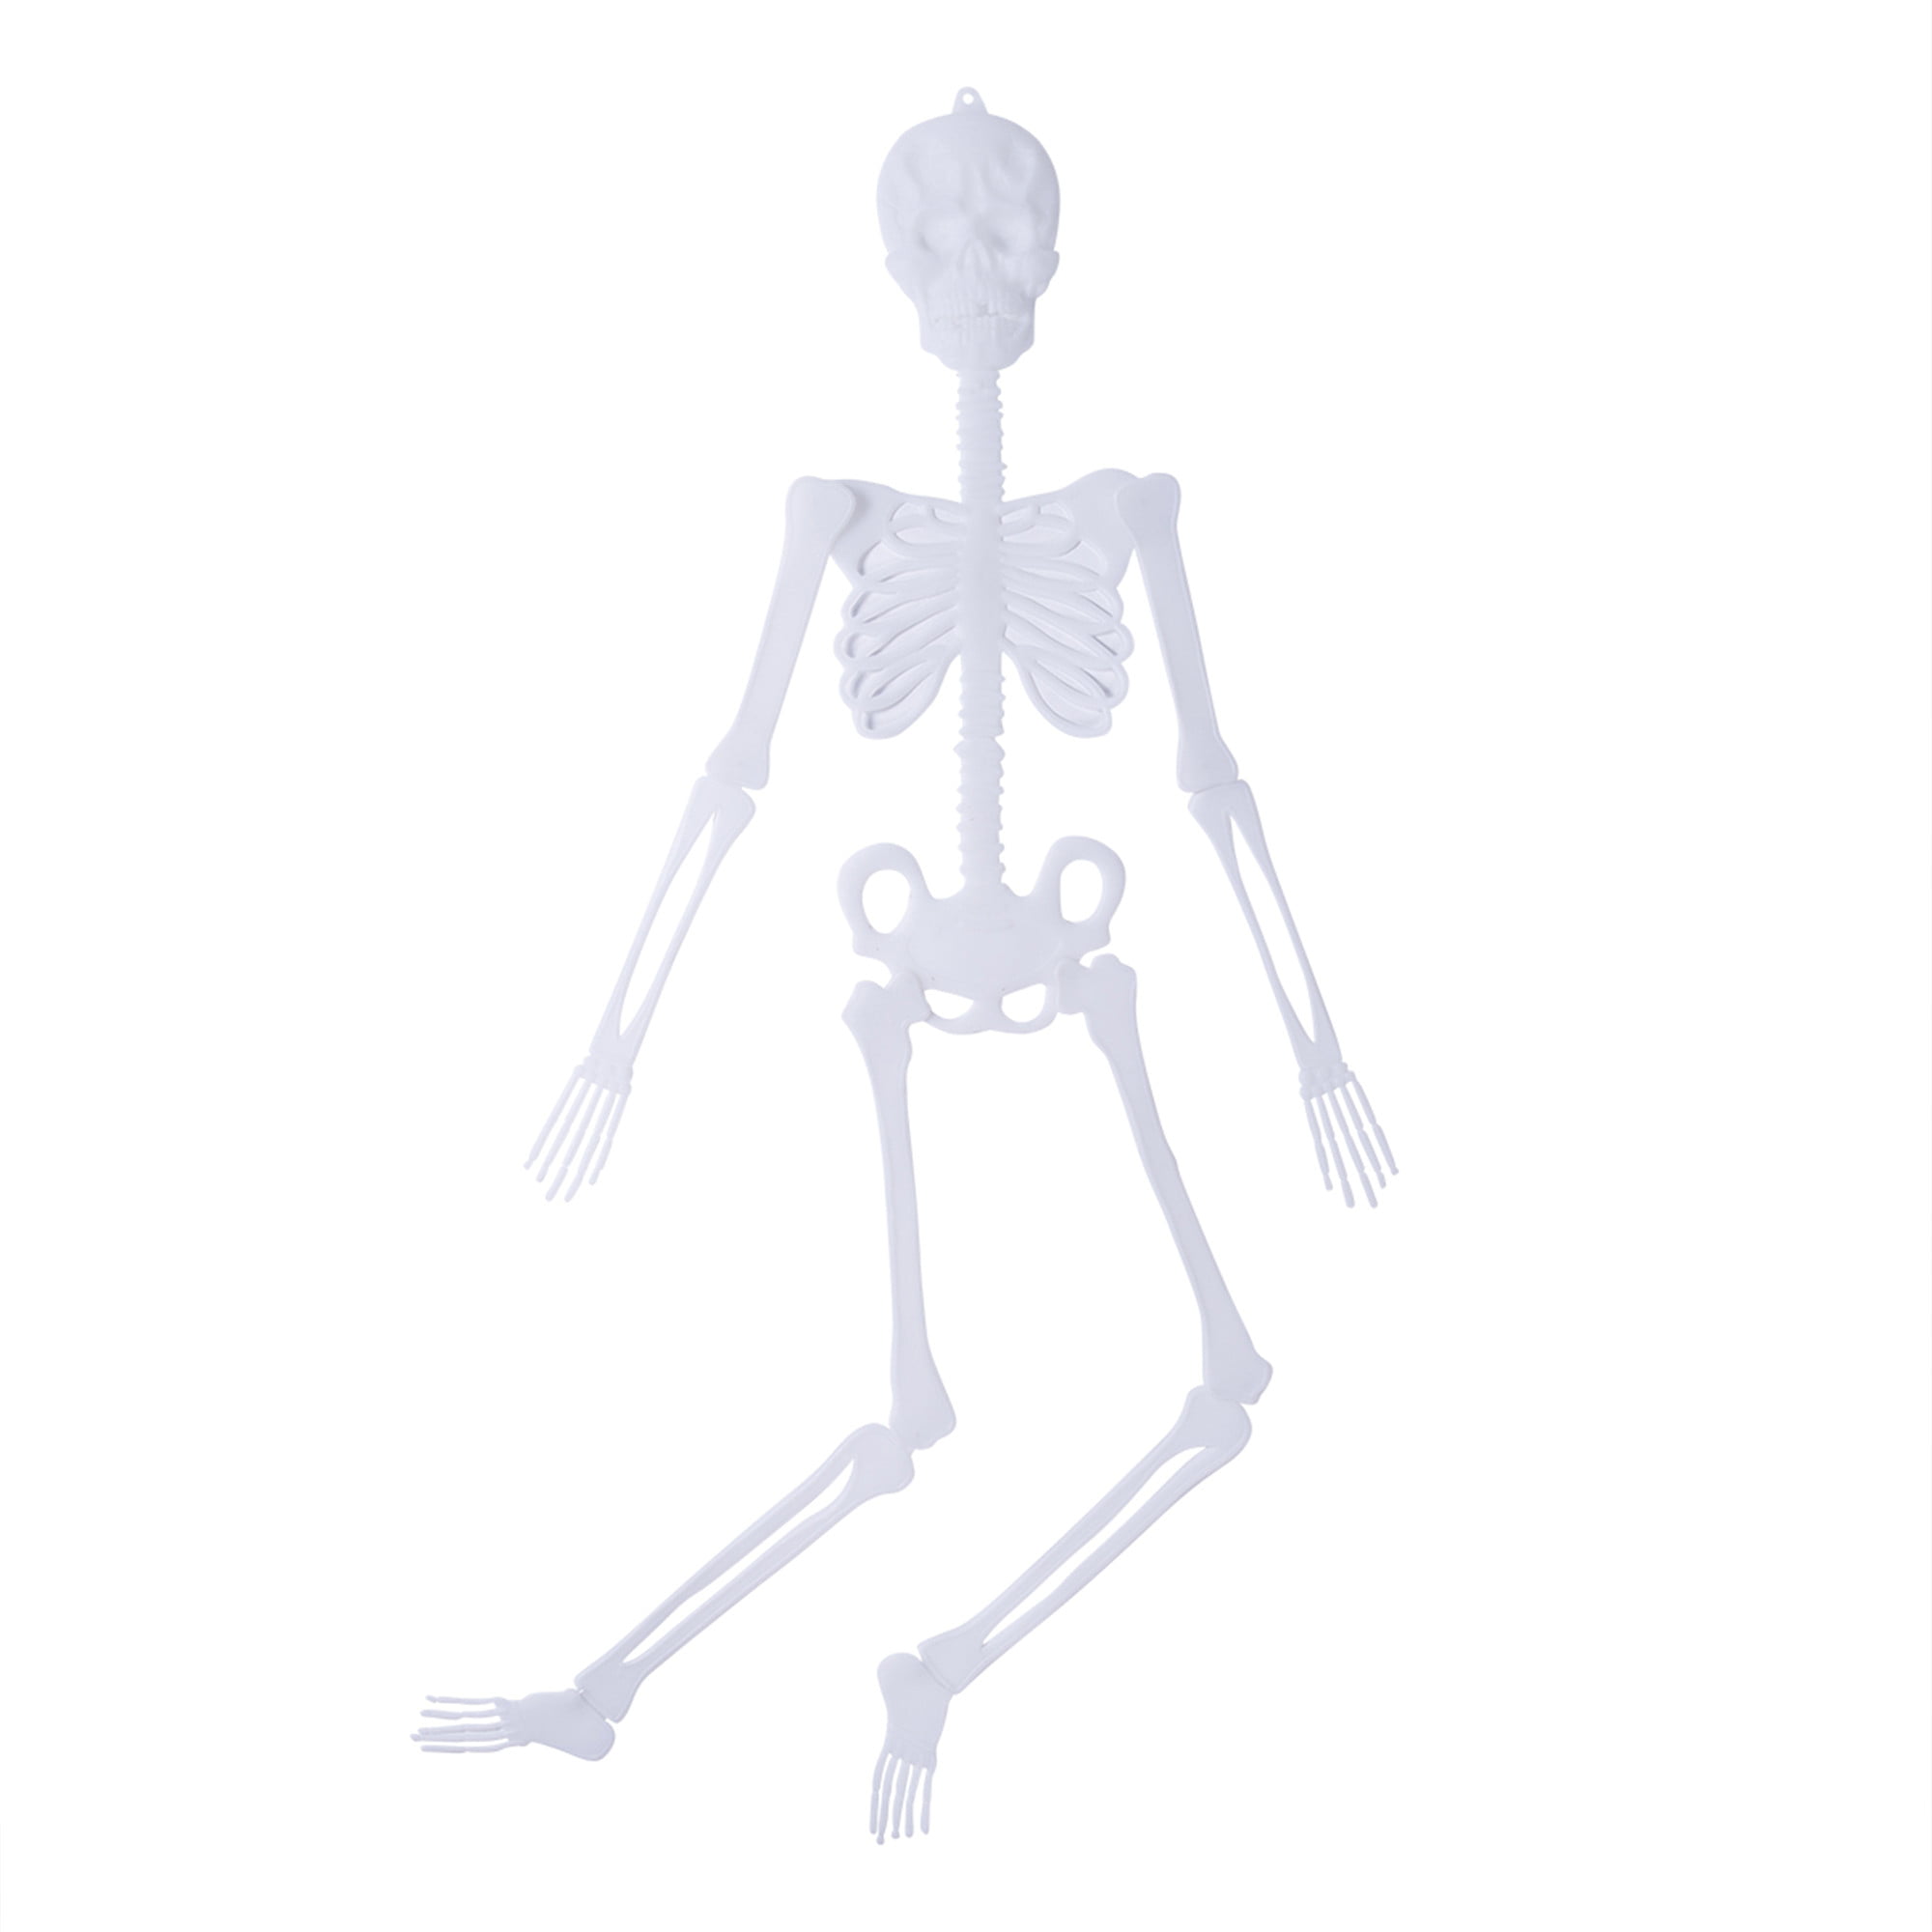 Glow In The Dark Halloween Hanging Skeleton Decorations 90cm Full Body Posable Joints Movable Arm and Leg Halloween Props # 3